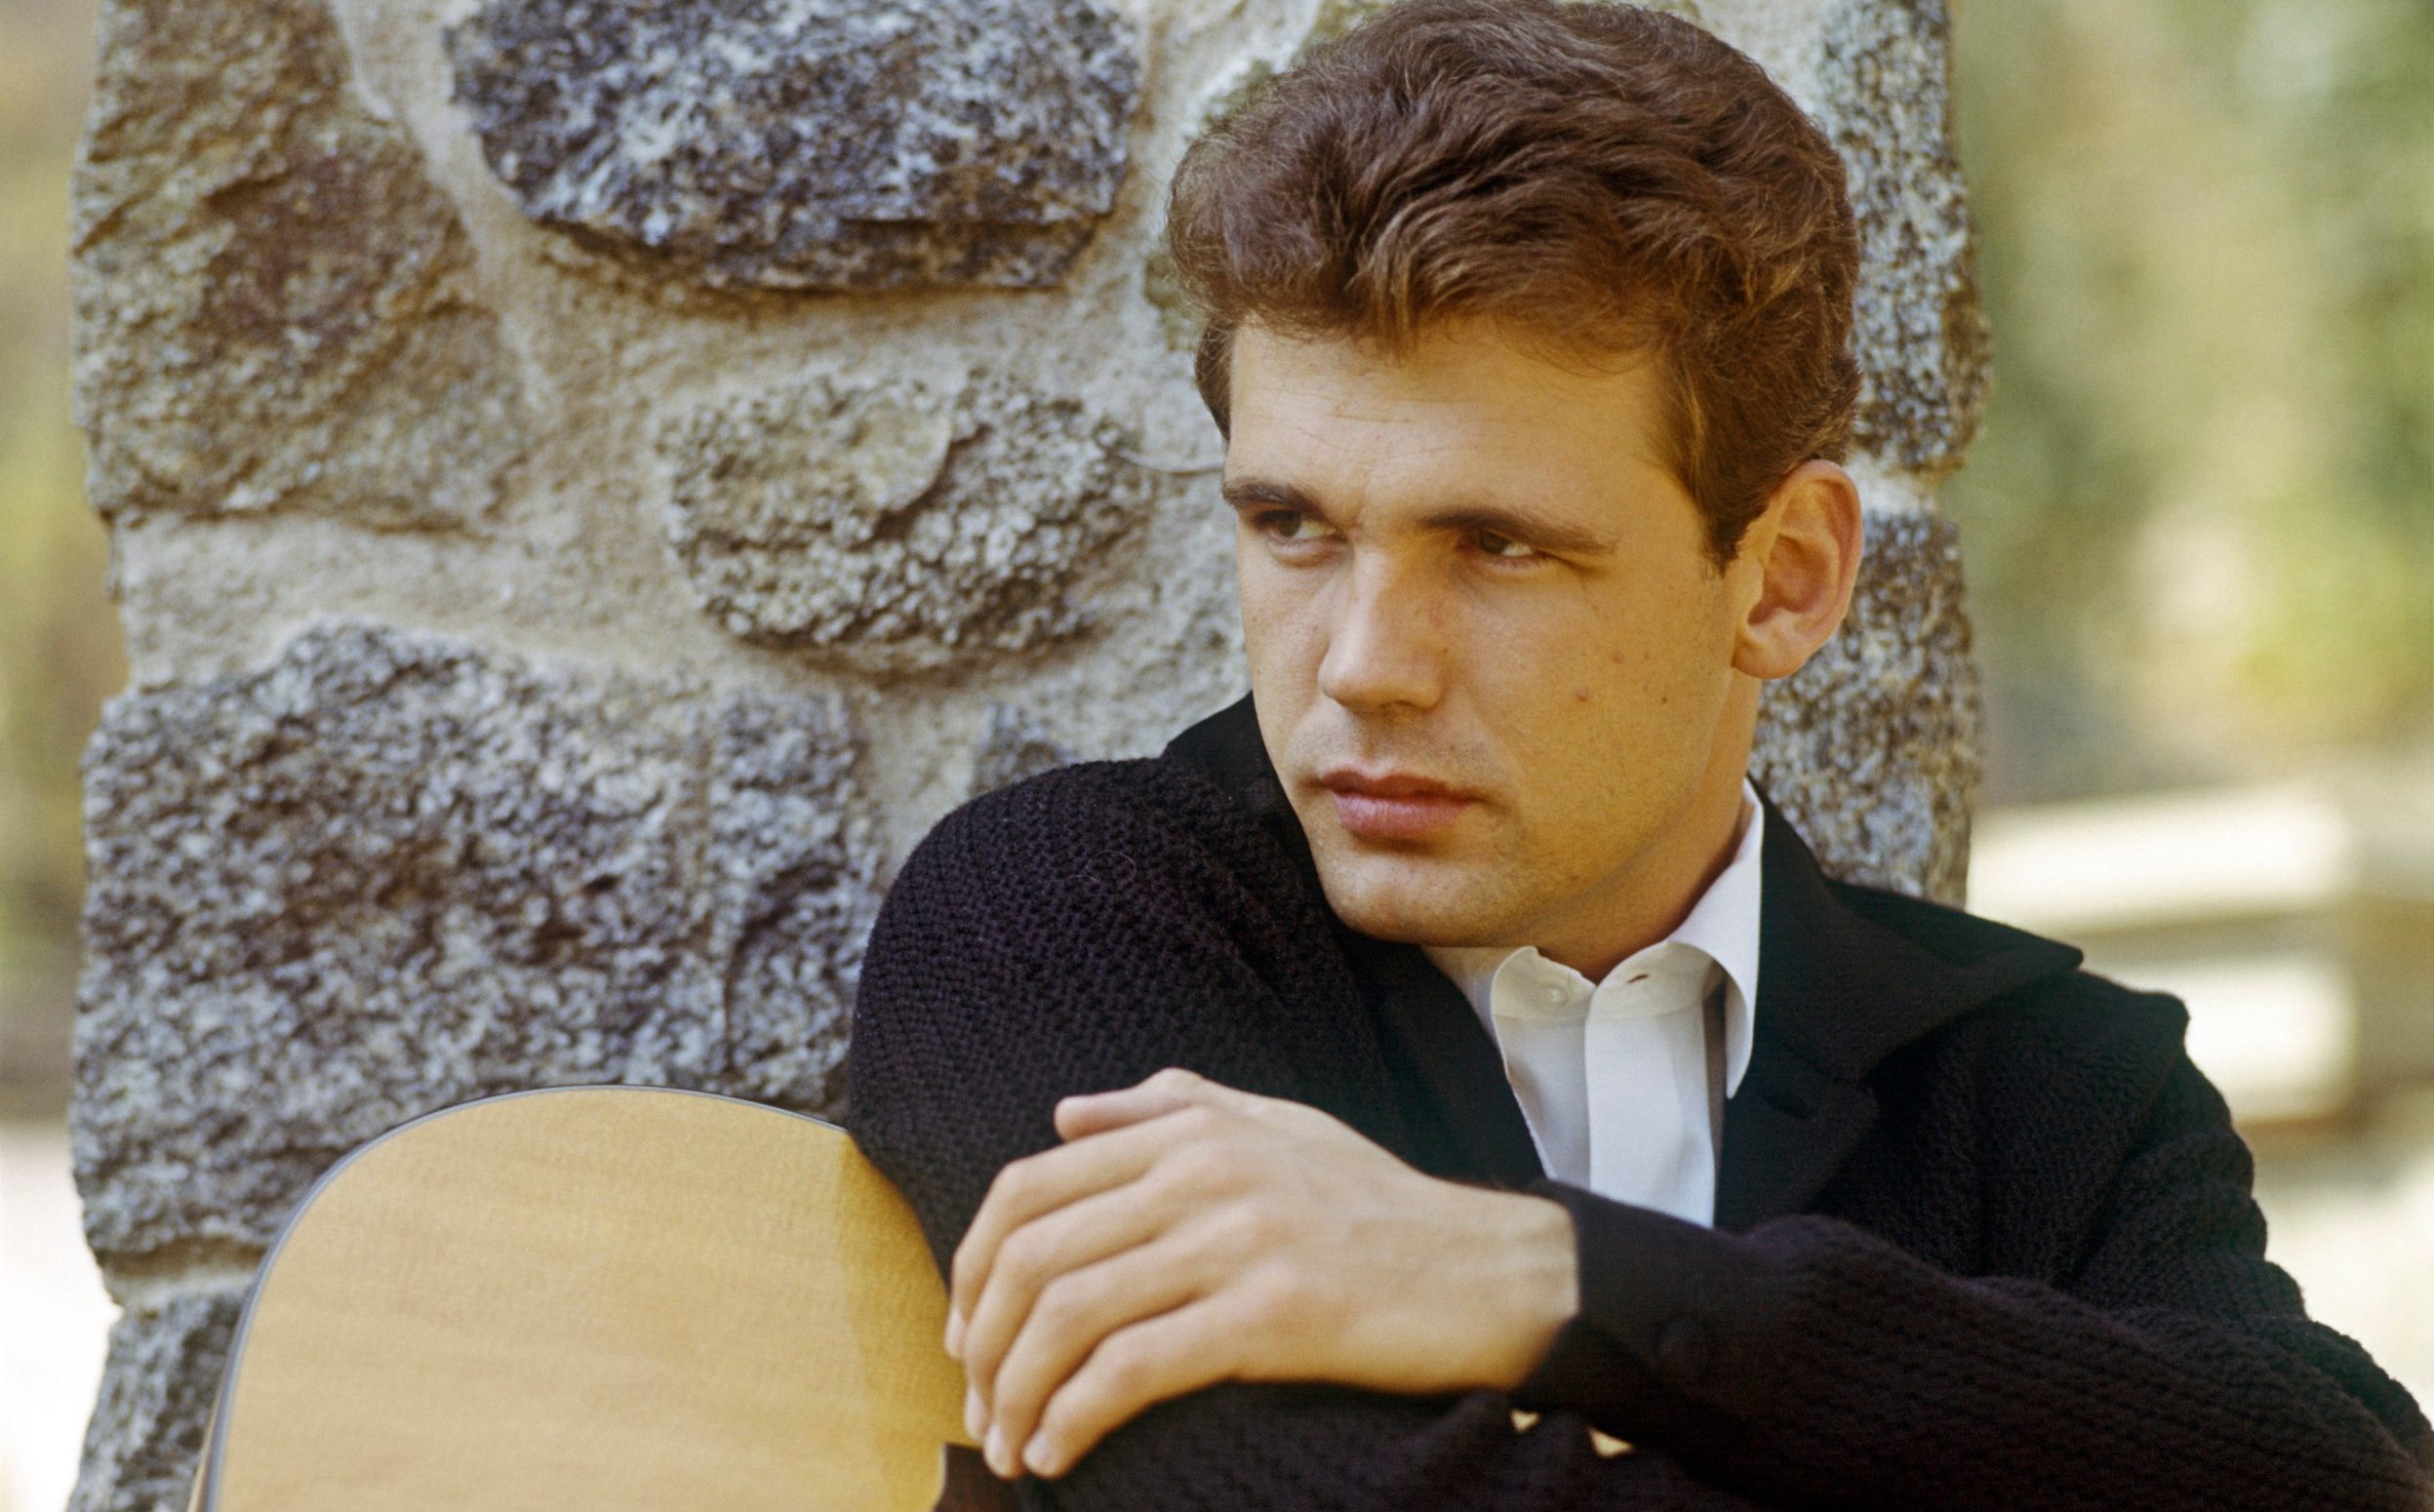 without duane eddy, these five guitar classics wouldn’t exist